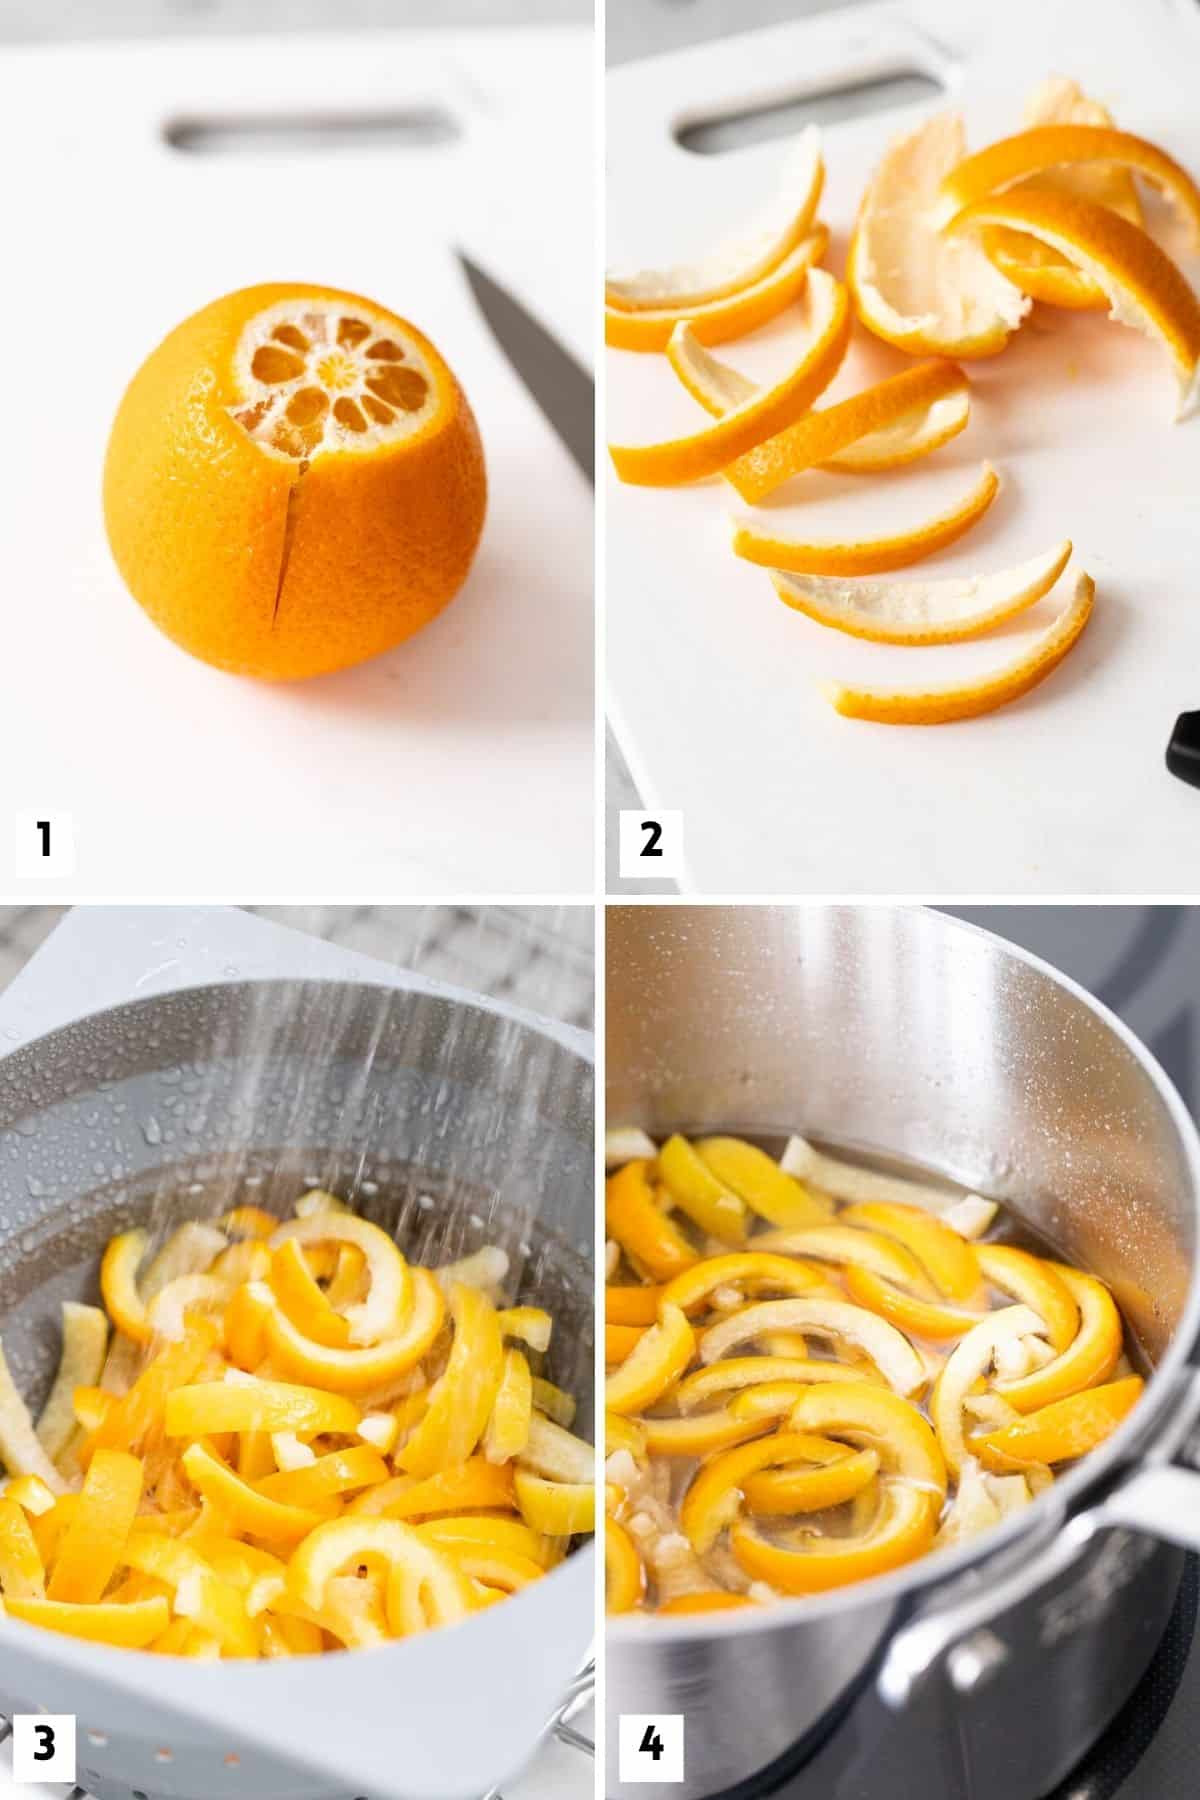 Steps for preparing and boiling candied peel.